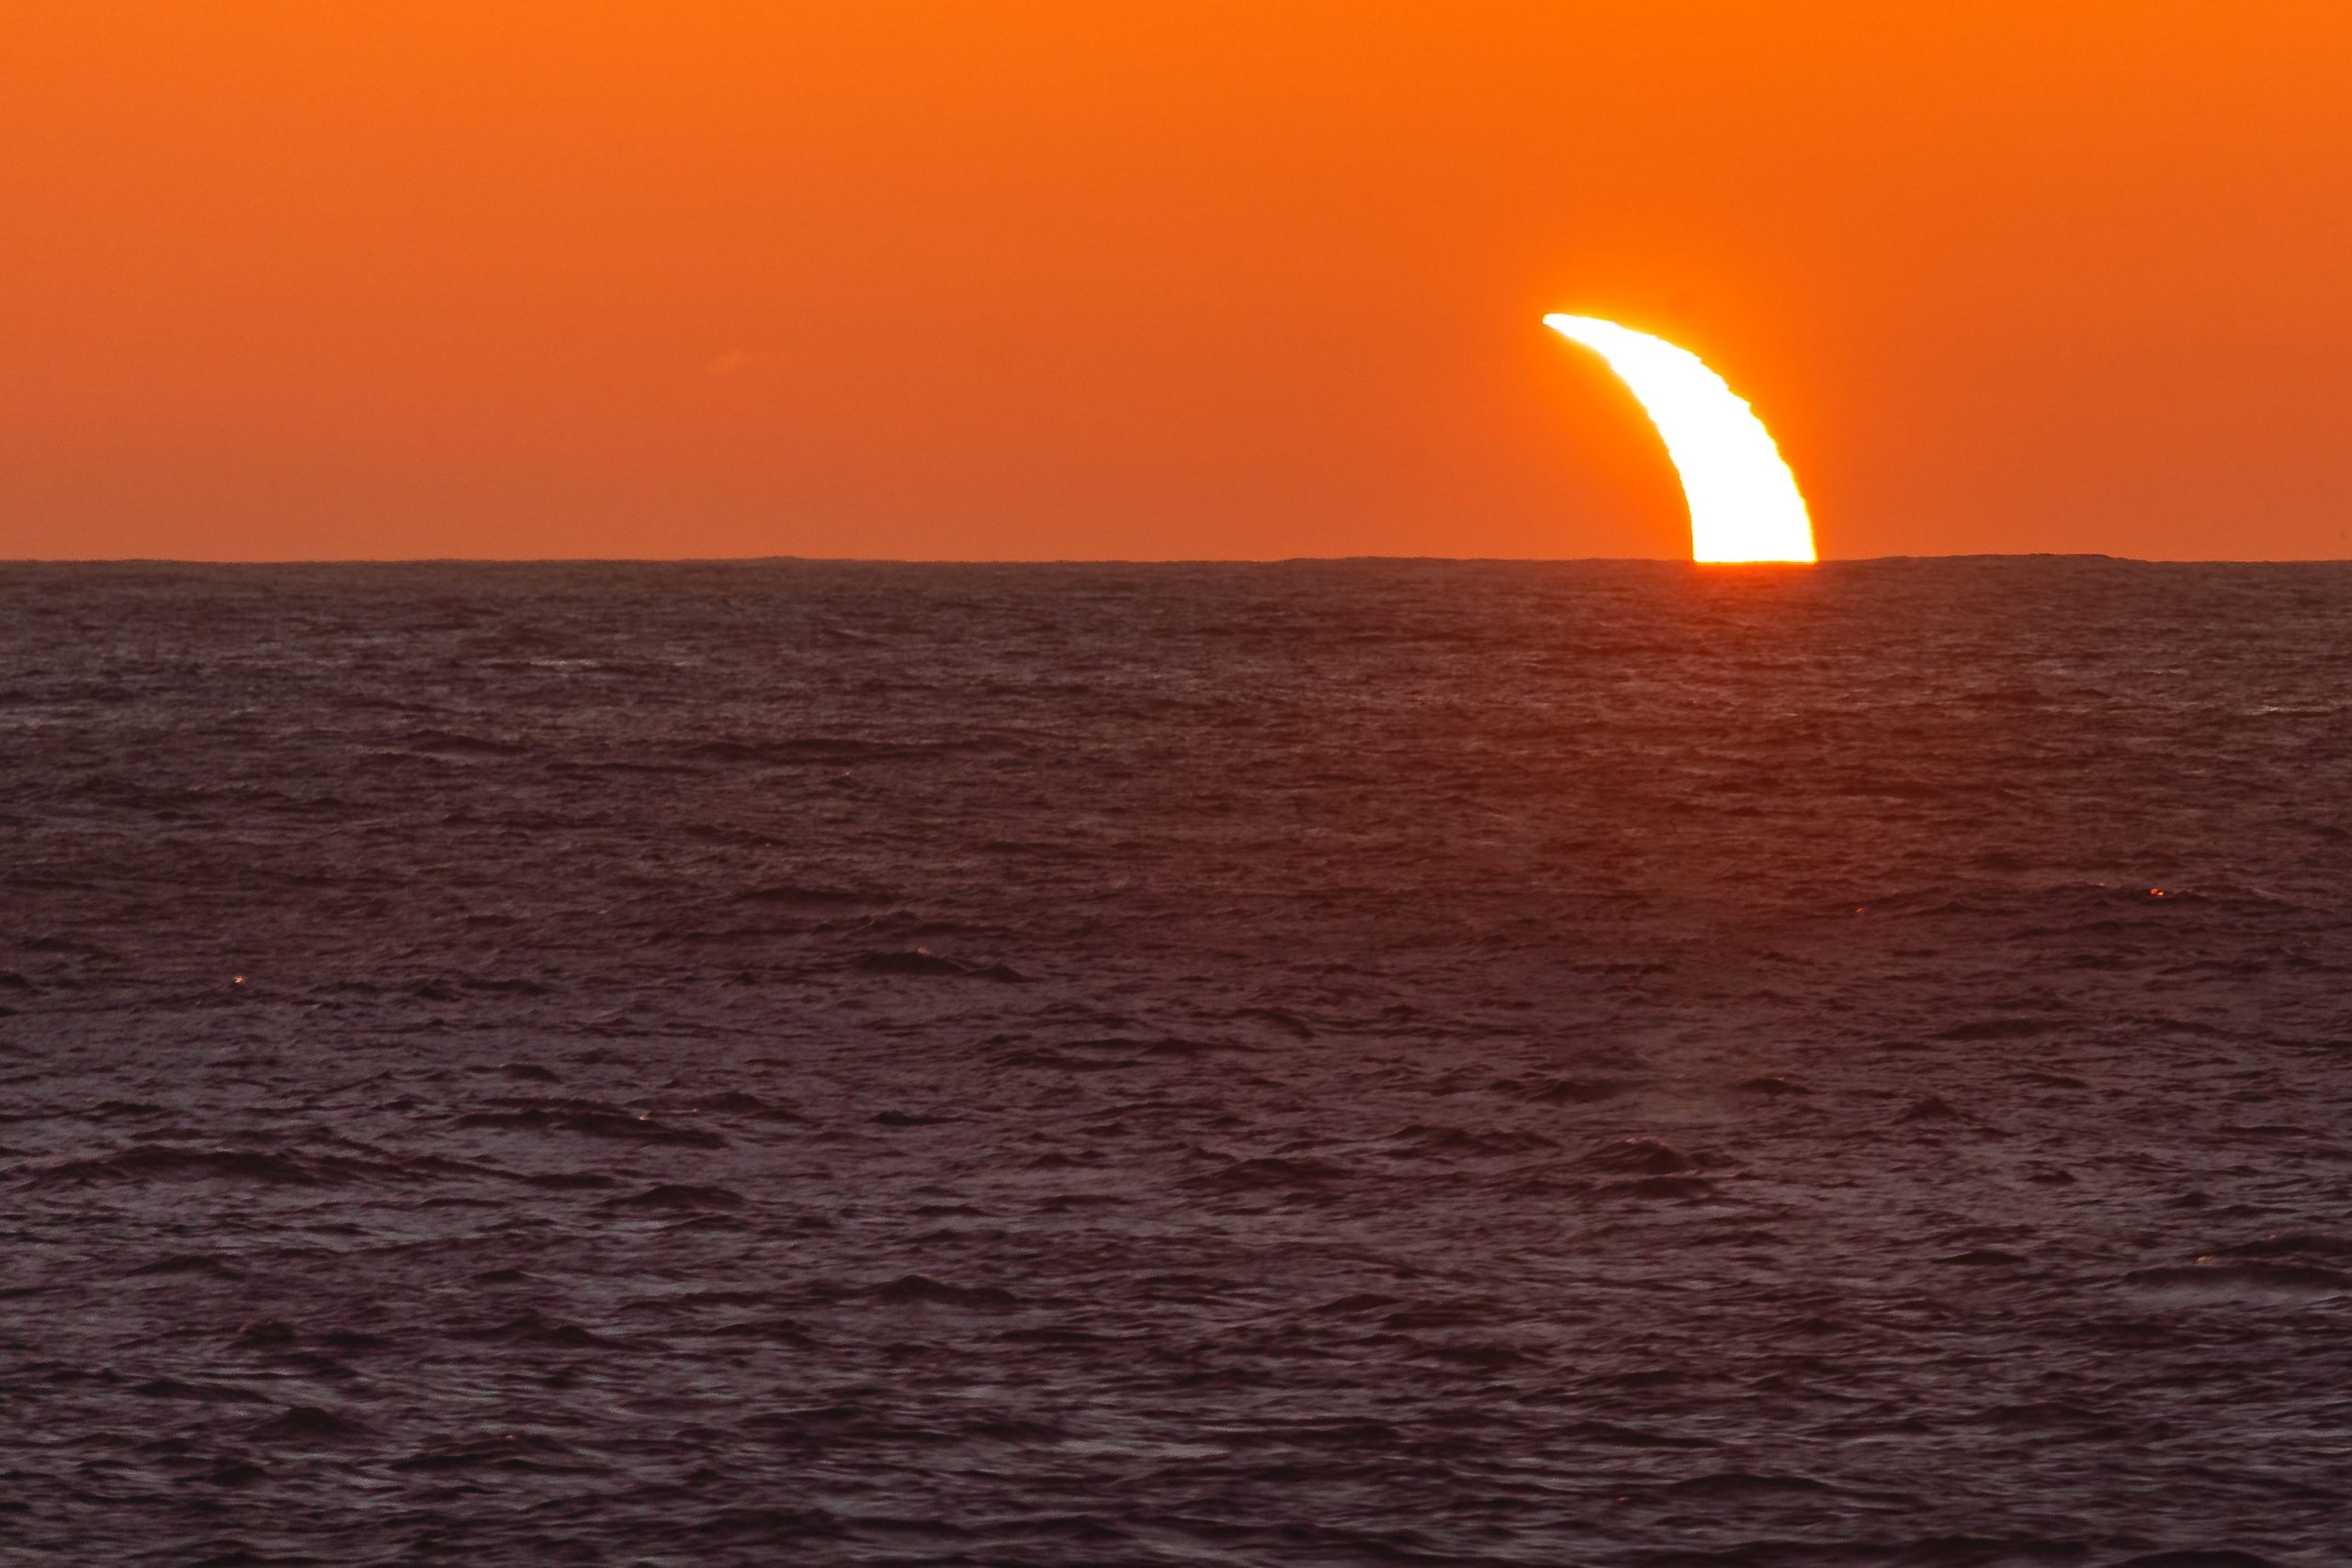 Mesmerizing Photos Of This Years Only Total Solar Eclipse Show A Rare